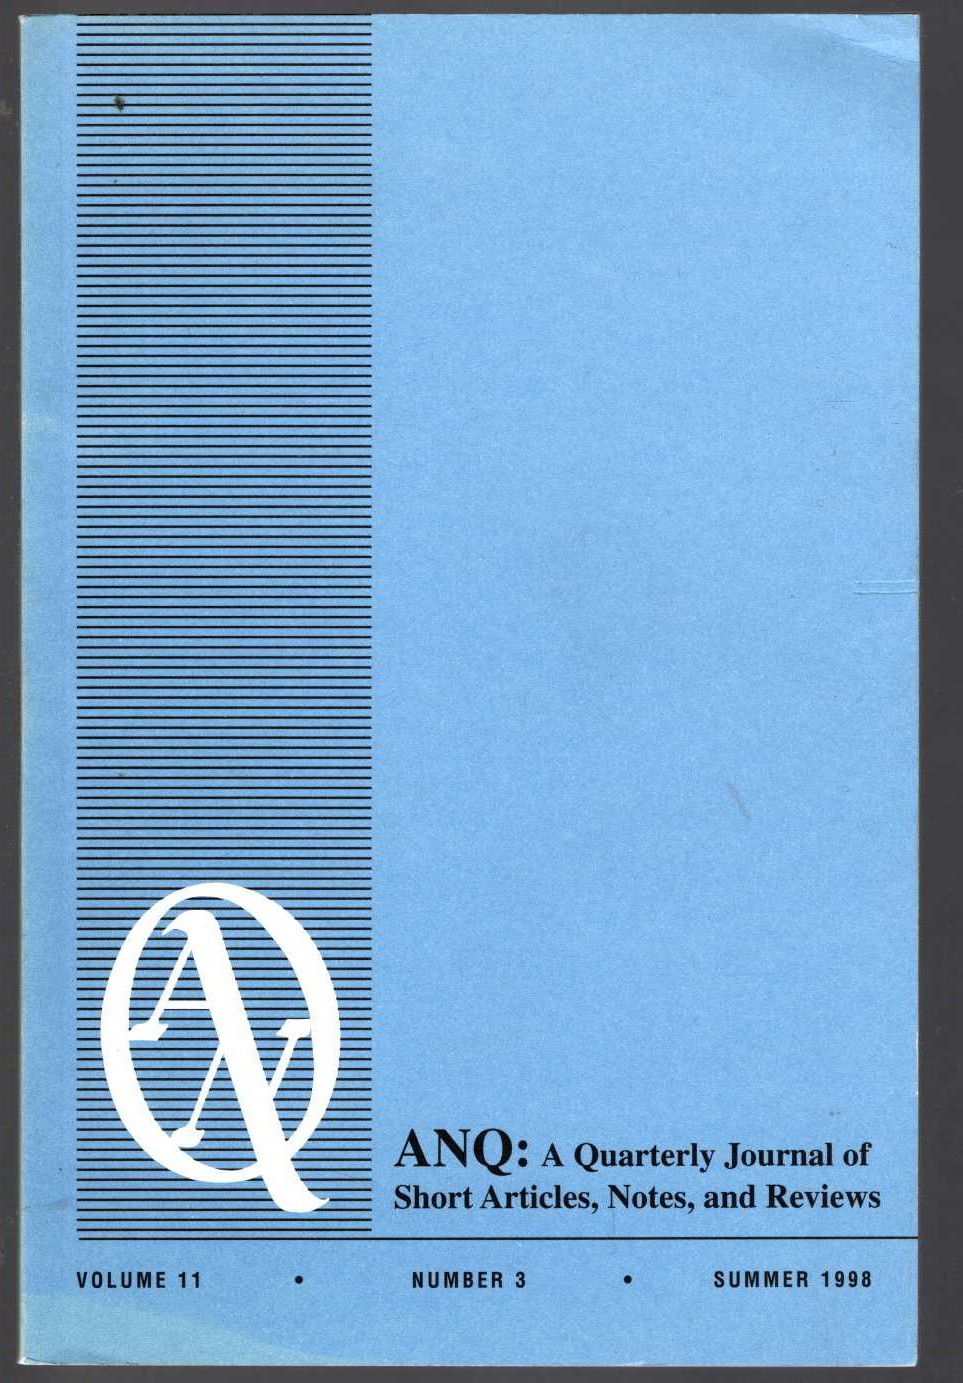 Various   ANQ: A QUARTERLY JOURNAL OF SHORT ARTICLES, NOTES, AND REVIEWS. Volume 11. Number 3. Summer 1998 front book cover image